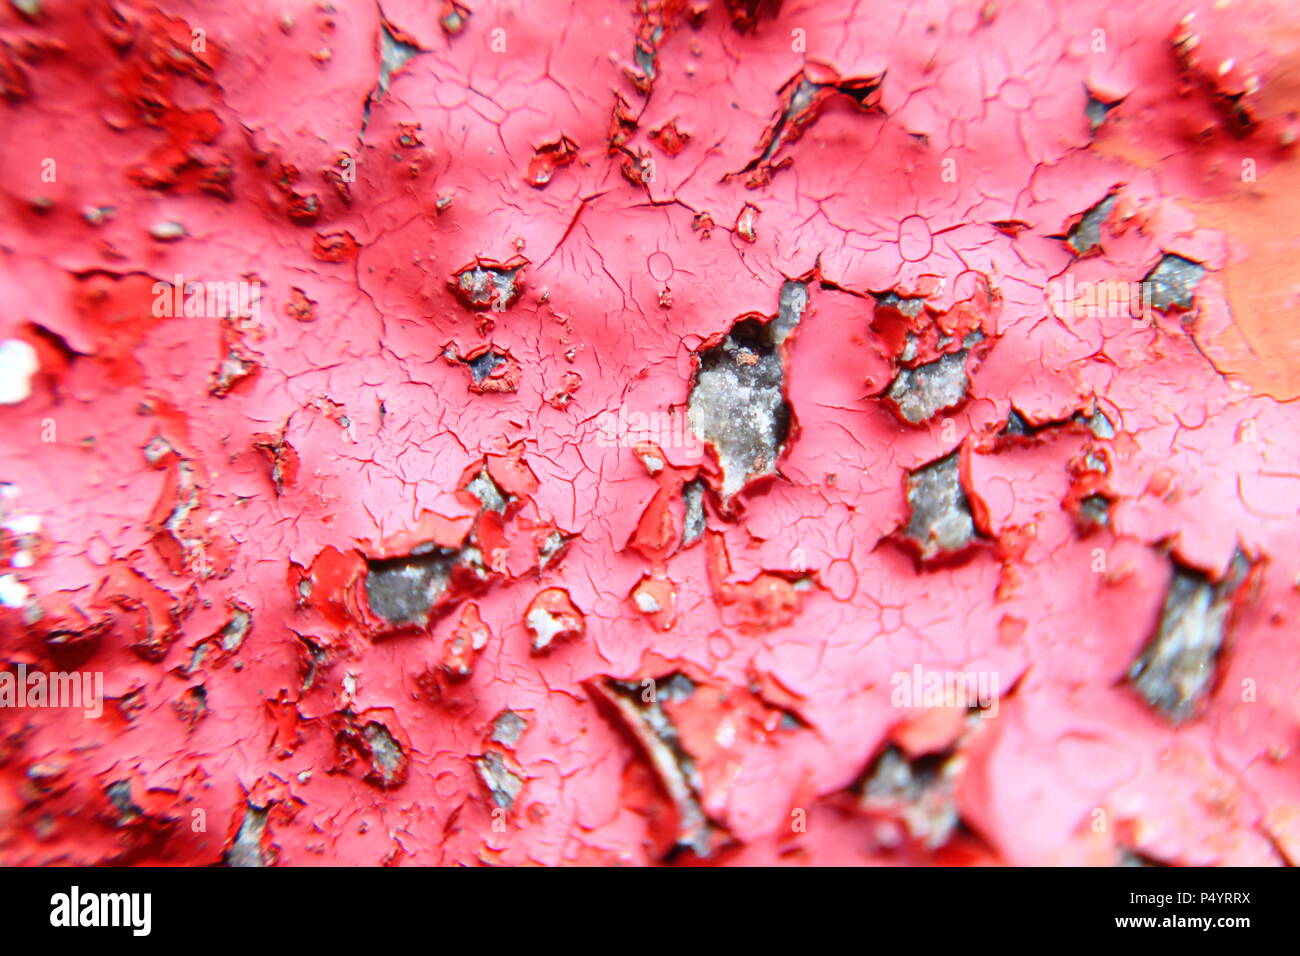 Macro light blurry photo of painted wall with red cracked color surface. Stock Photo